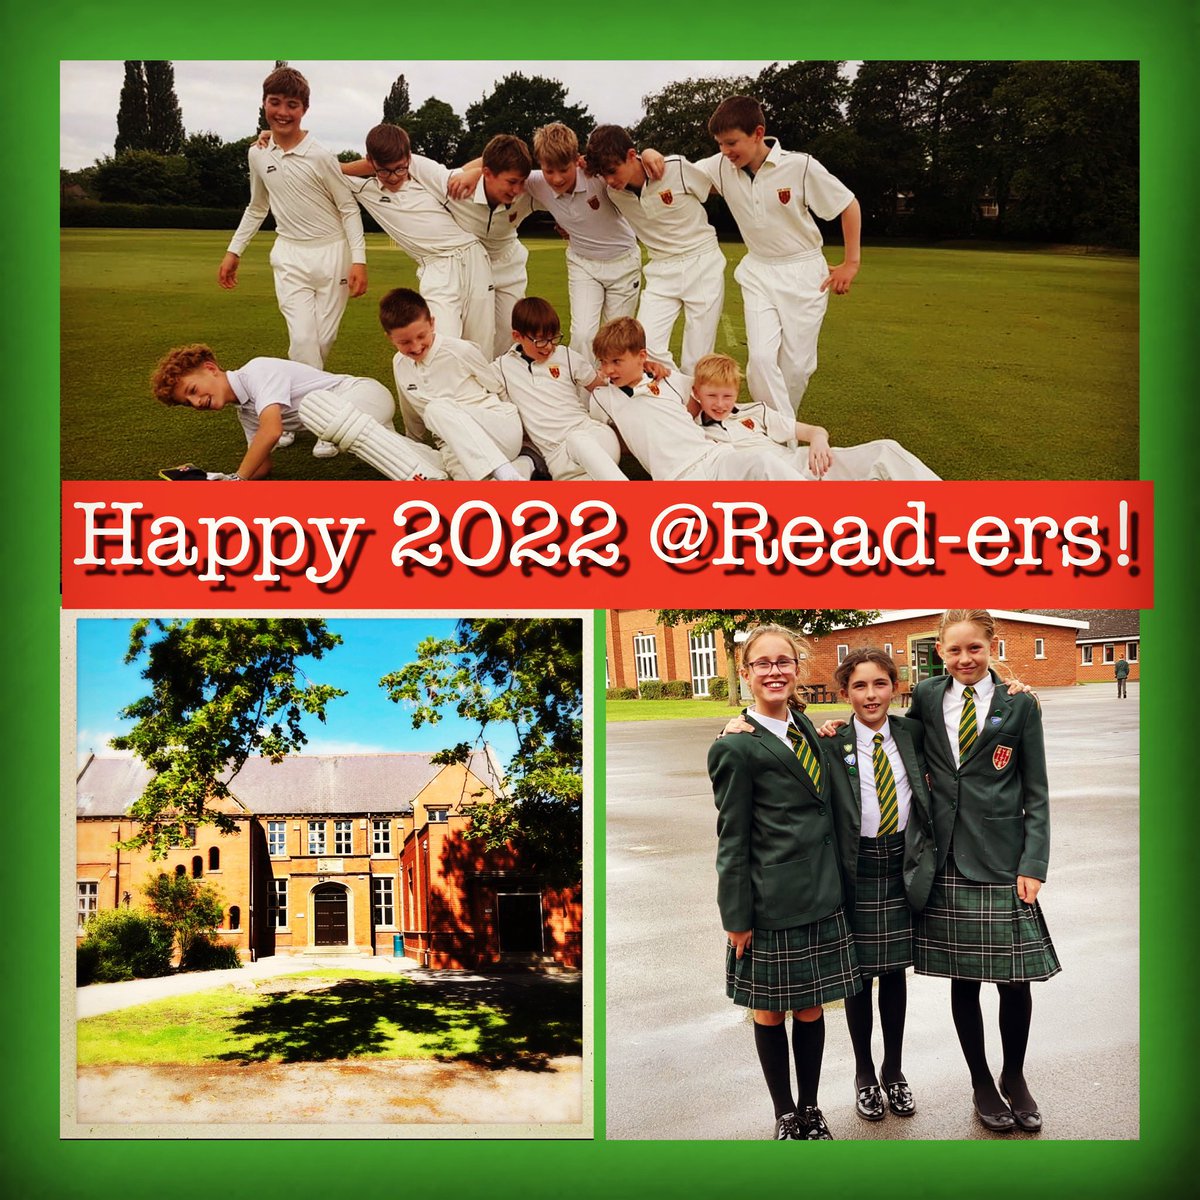 From Head, Ruth Ainley: “Happy 2022 Read, & to new families joining us after many successful taster days. Thank you for your support & the precious gift of ‘family’; the hallmark of Read. We can’t wait to see you all on Weds 5th Jan. Till then, best wishes for the start of 2022.”